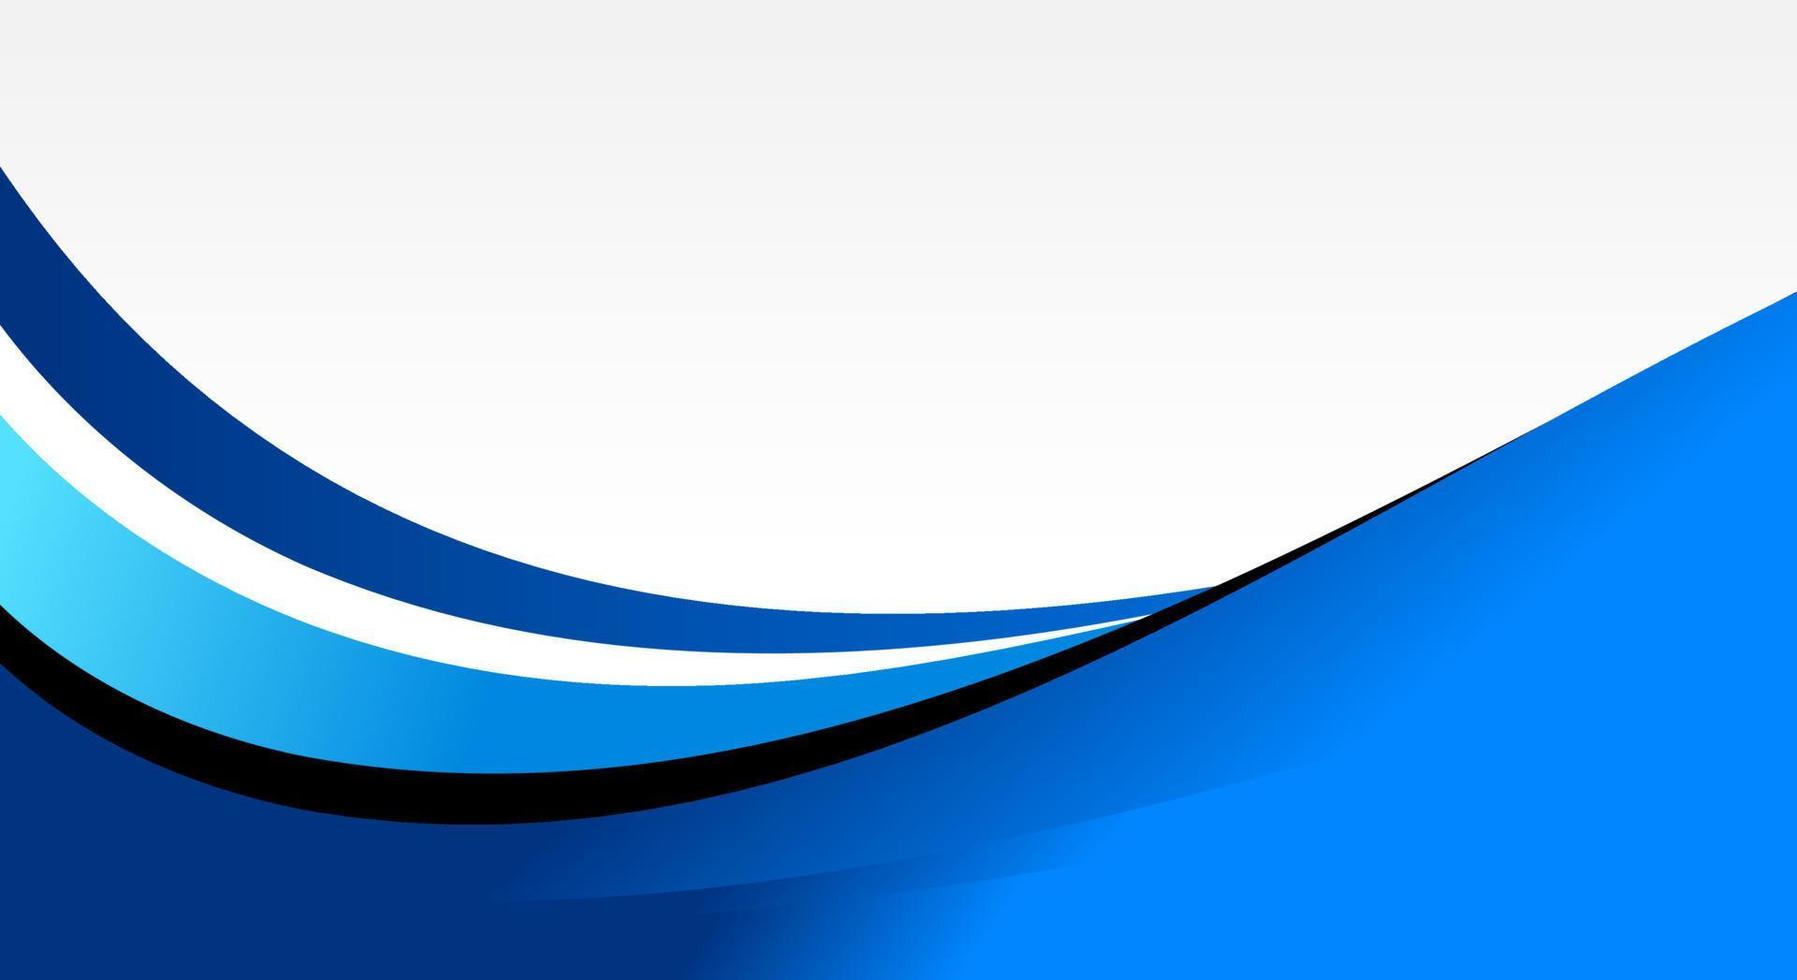 Abstract wave blue background vector